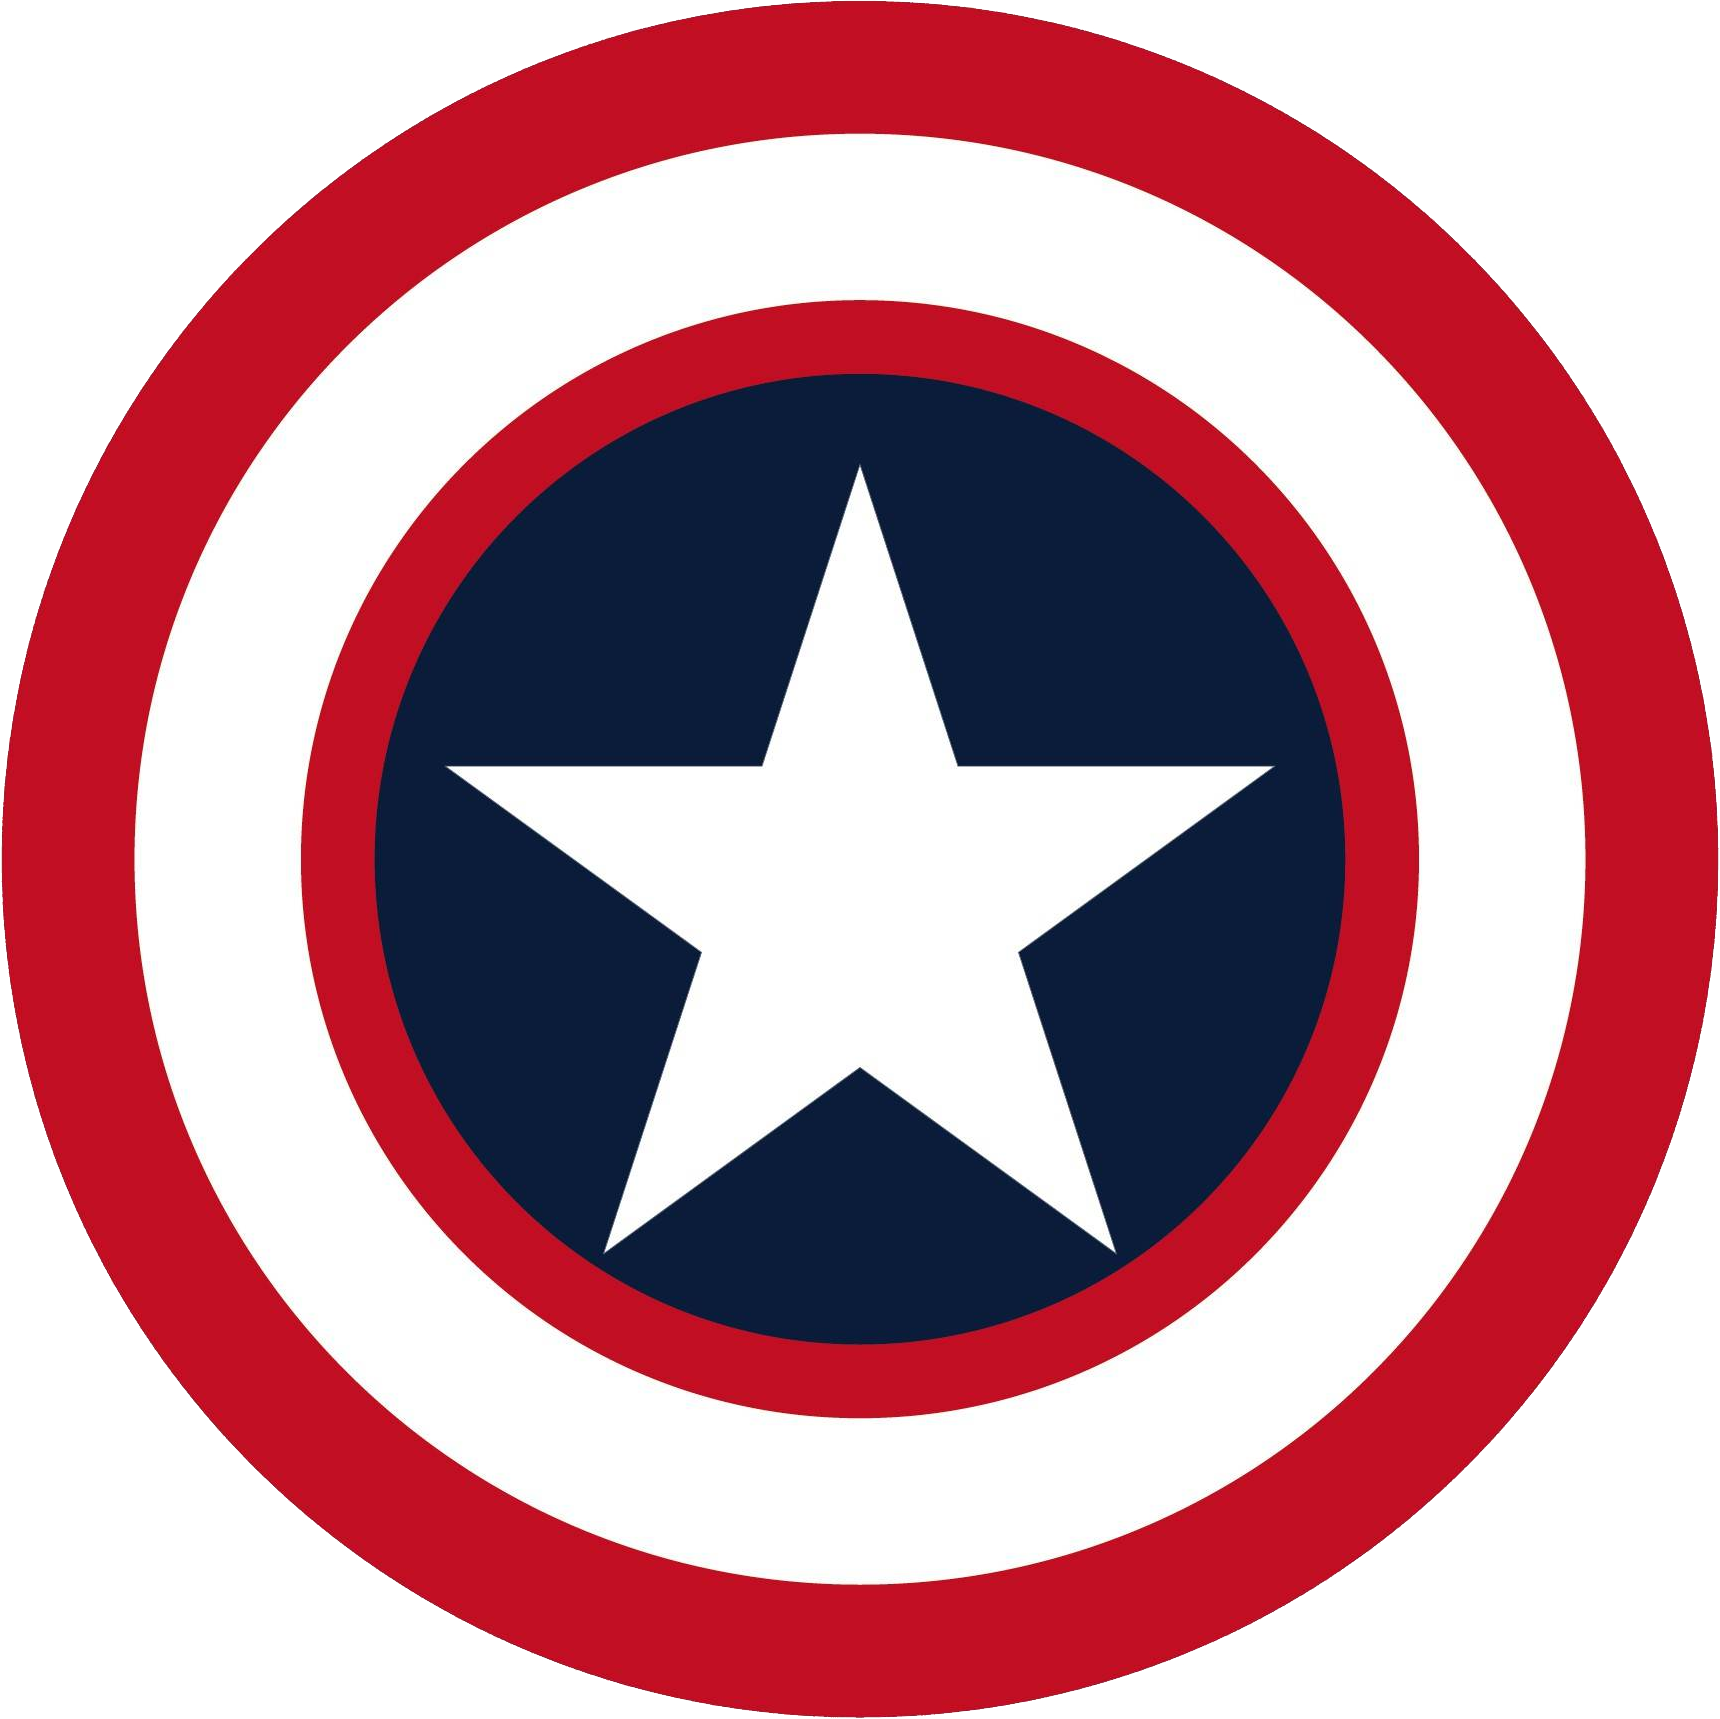 Captain America shield PNG